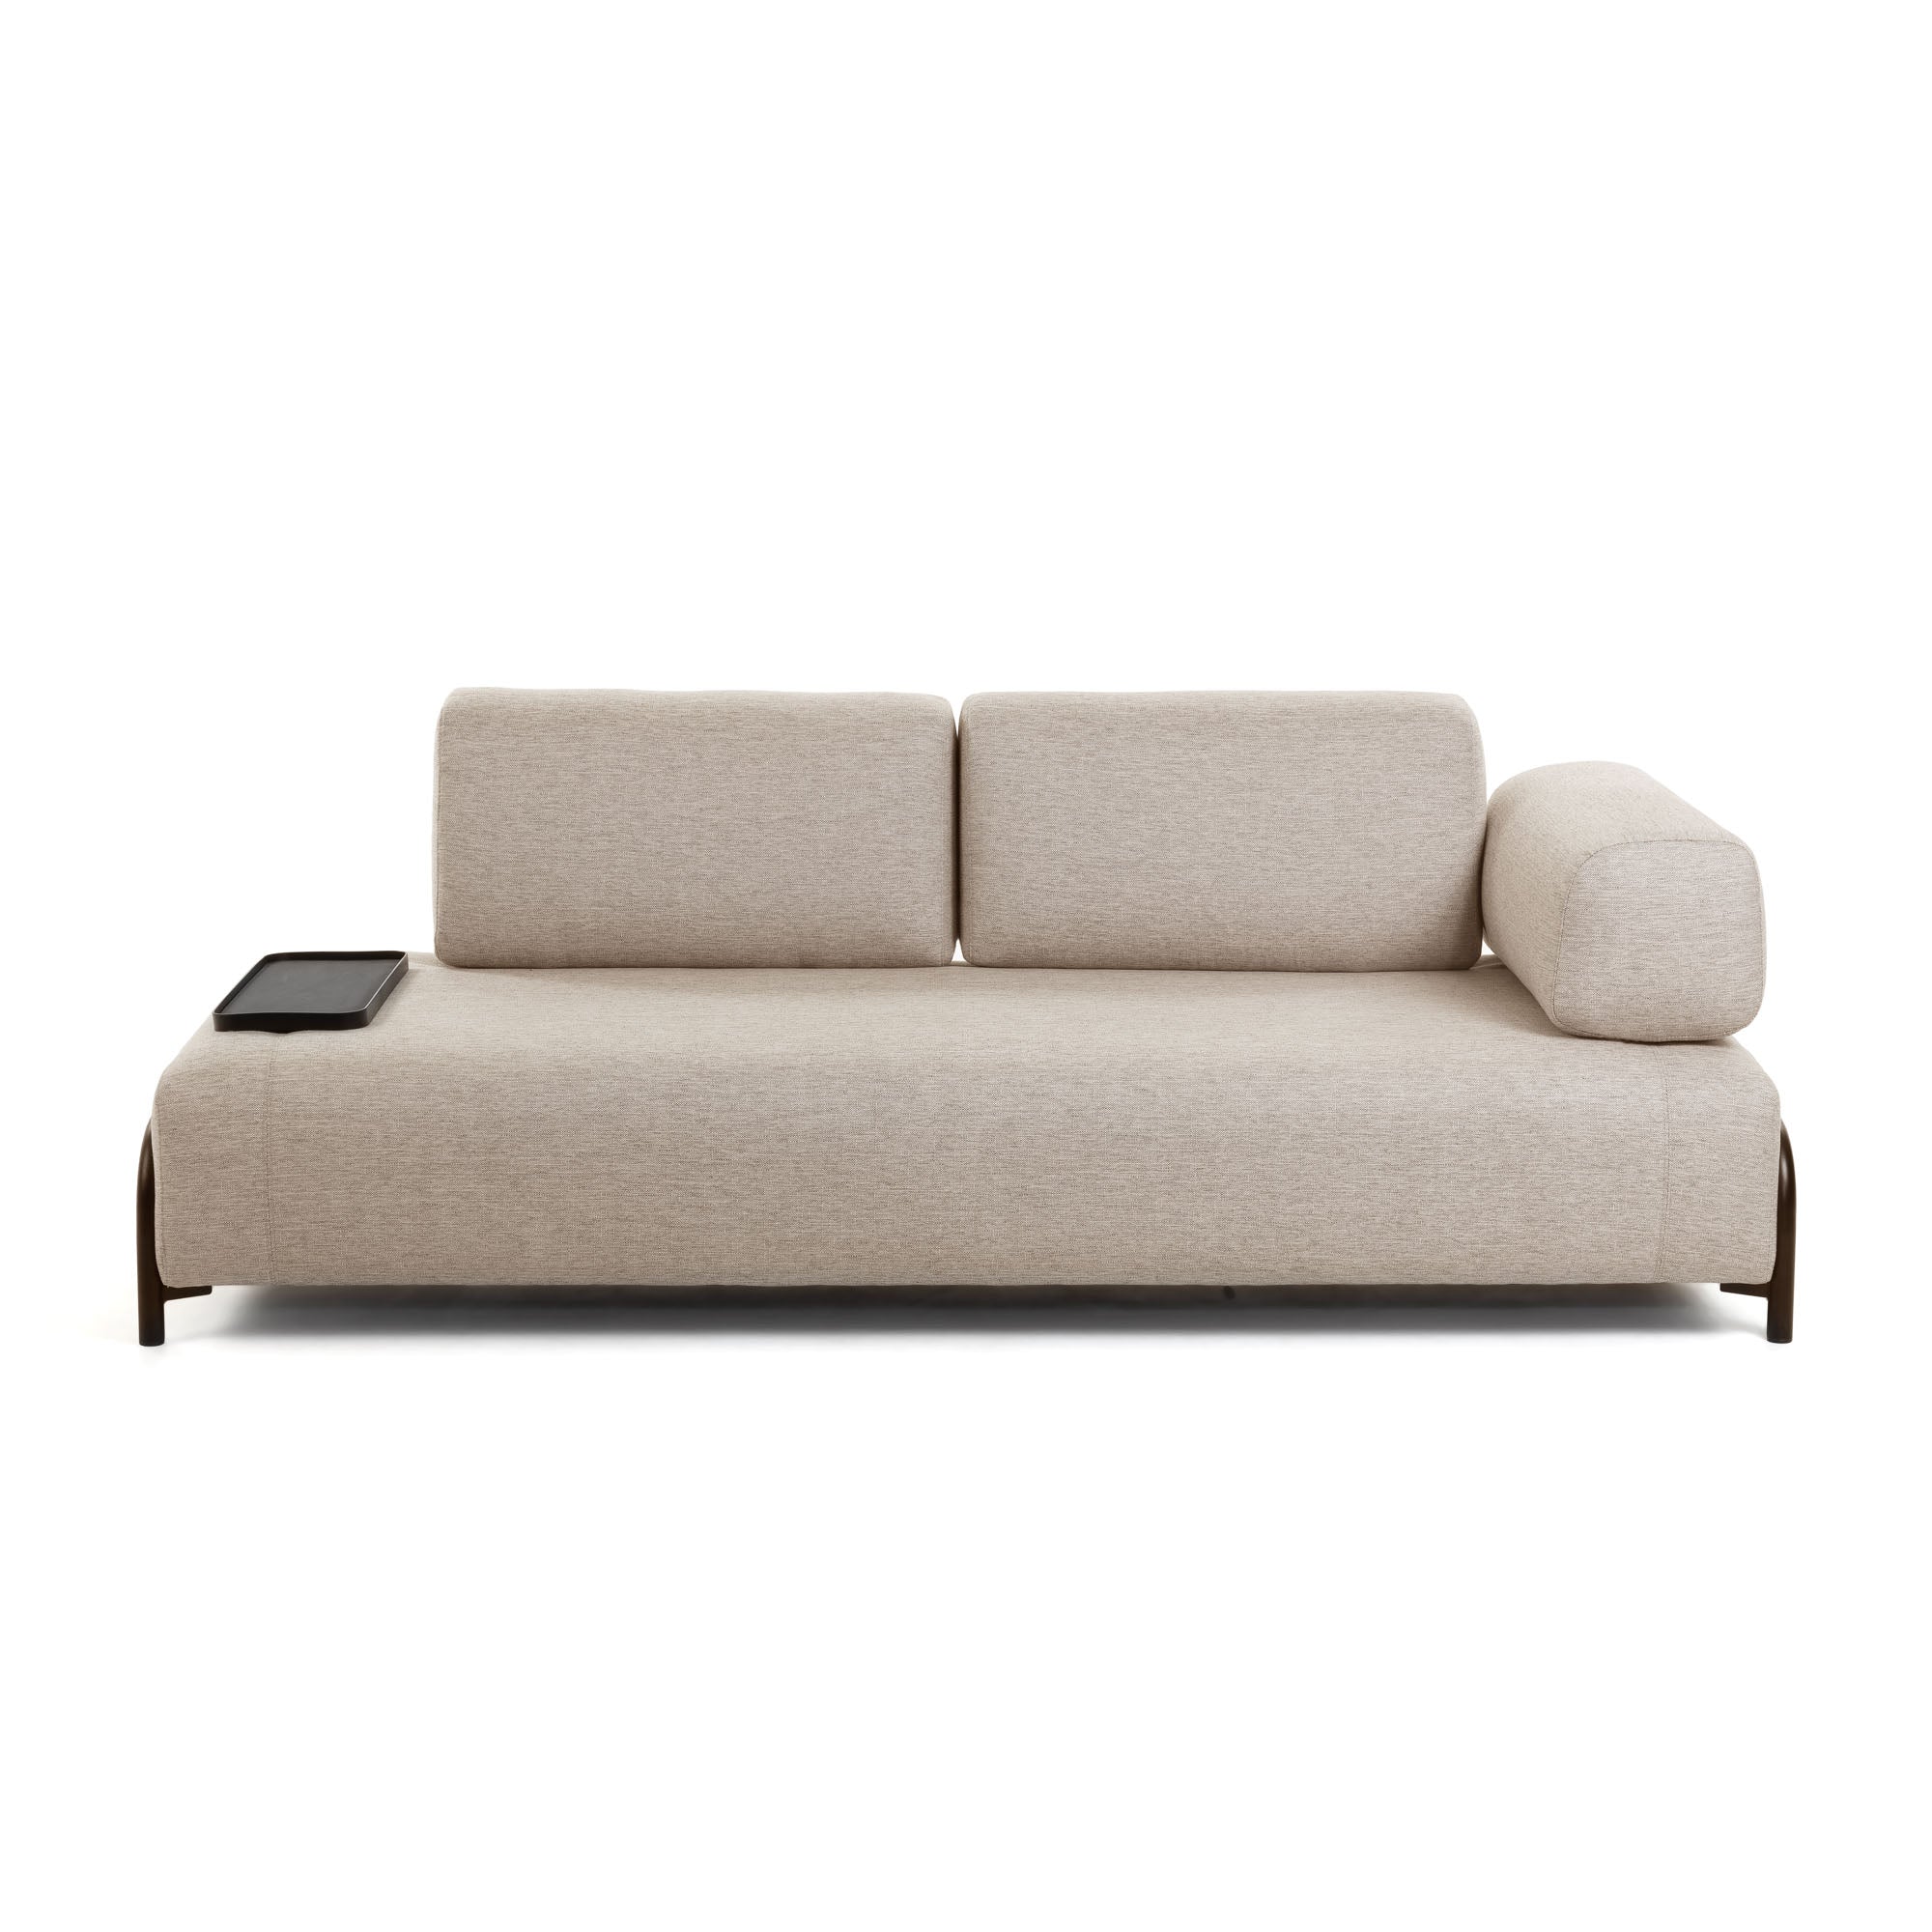 Compo 3 seater sofa with small tray in beige, 232 cm